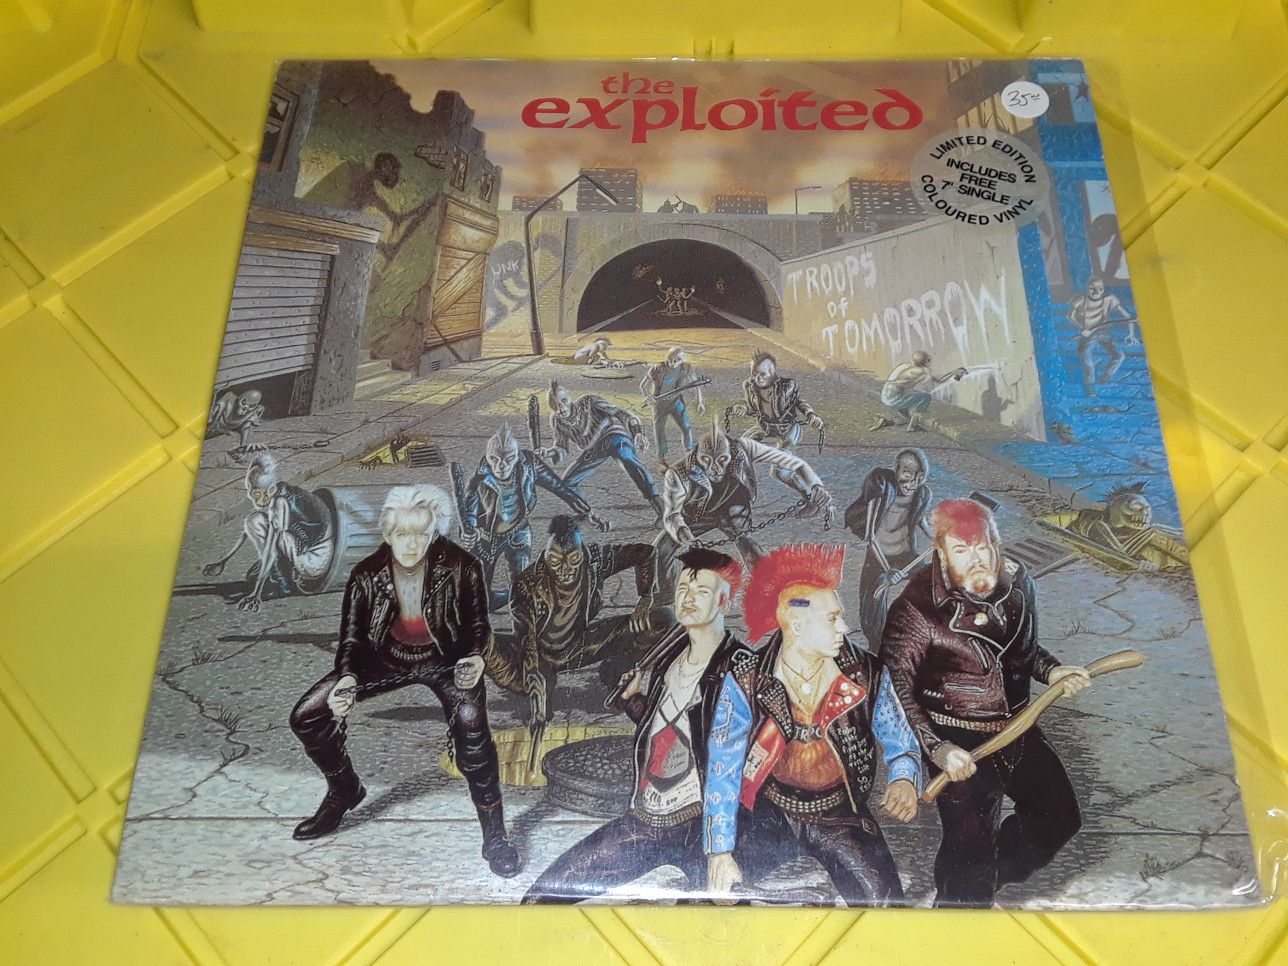 The Exploited - Troops of Tomorrow vinyl record album punk rock